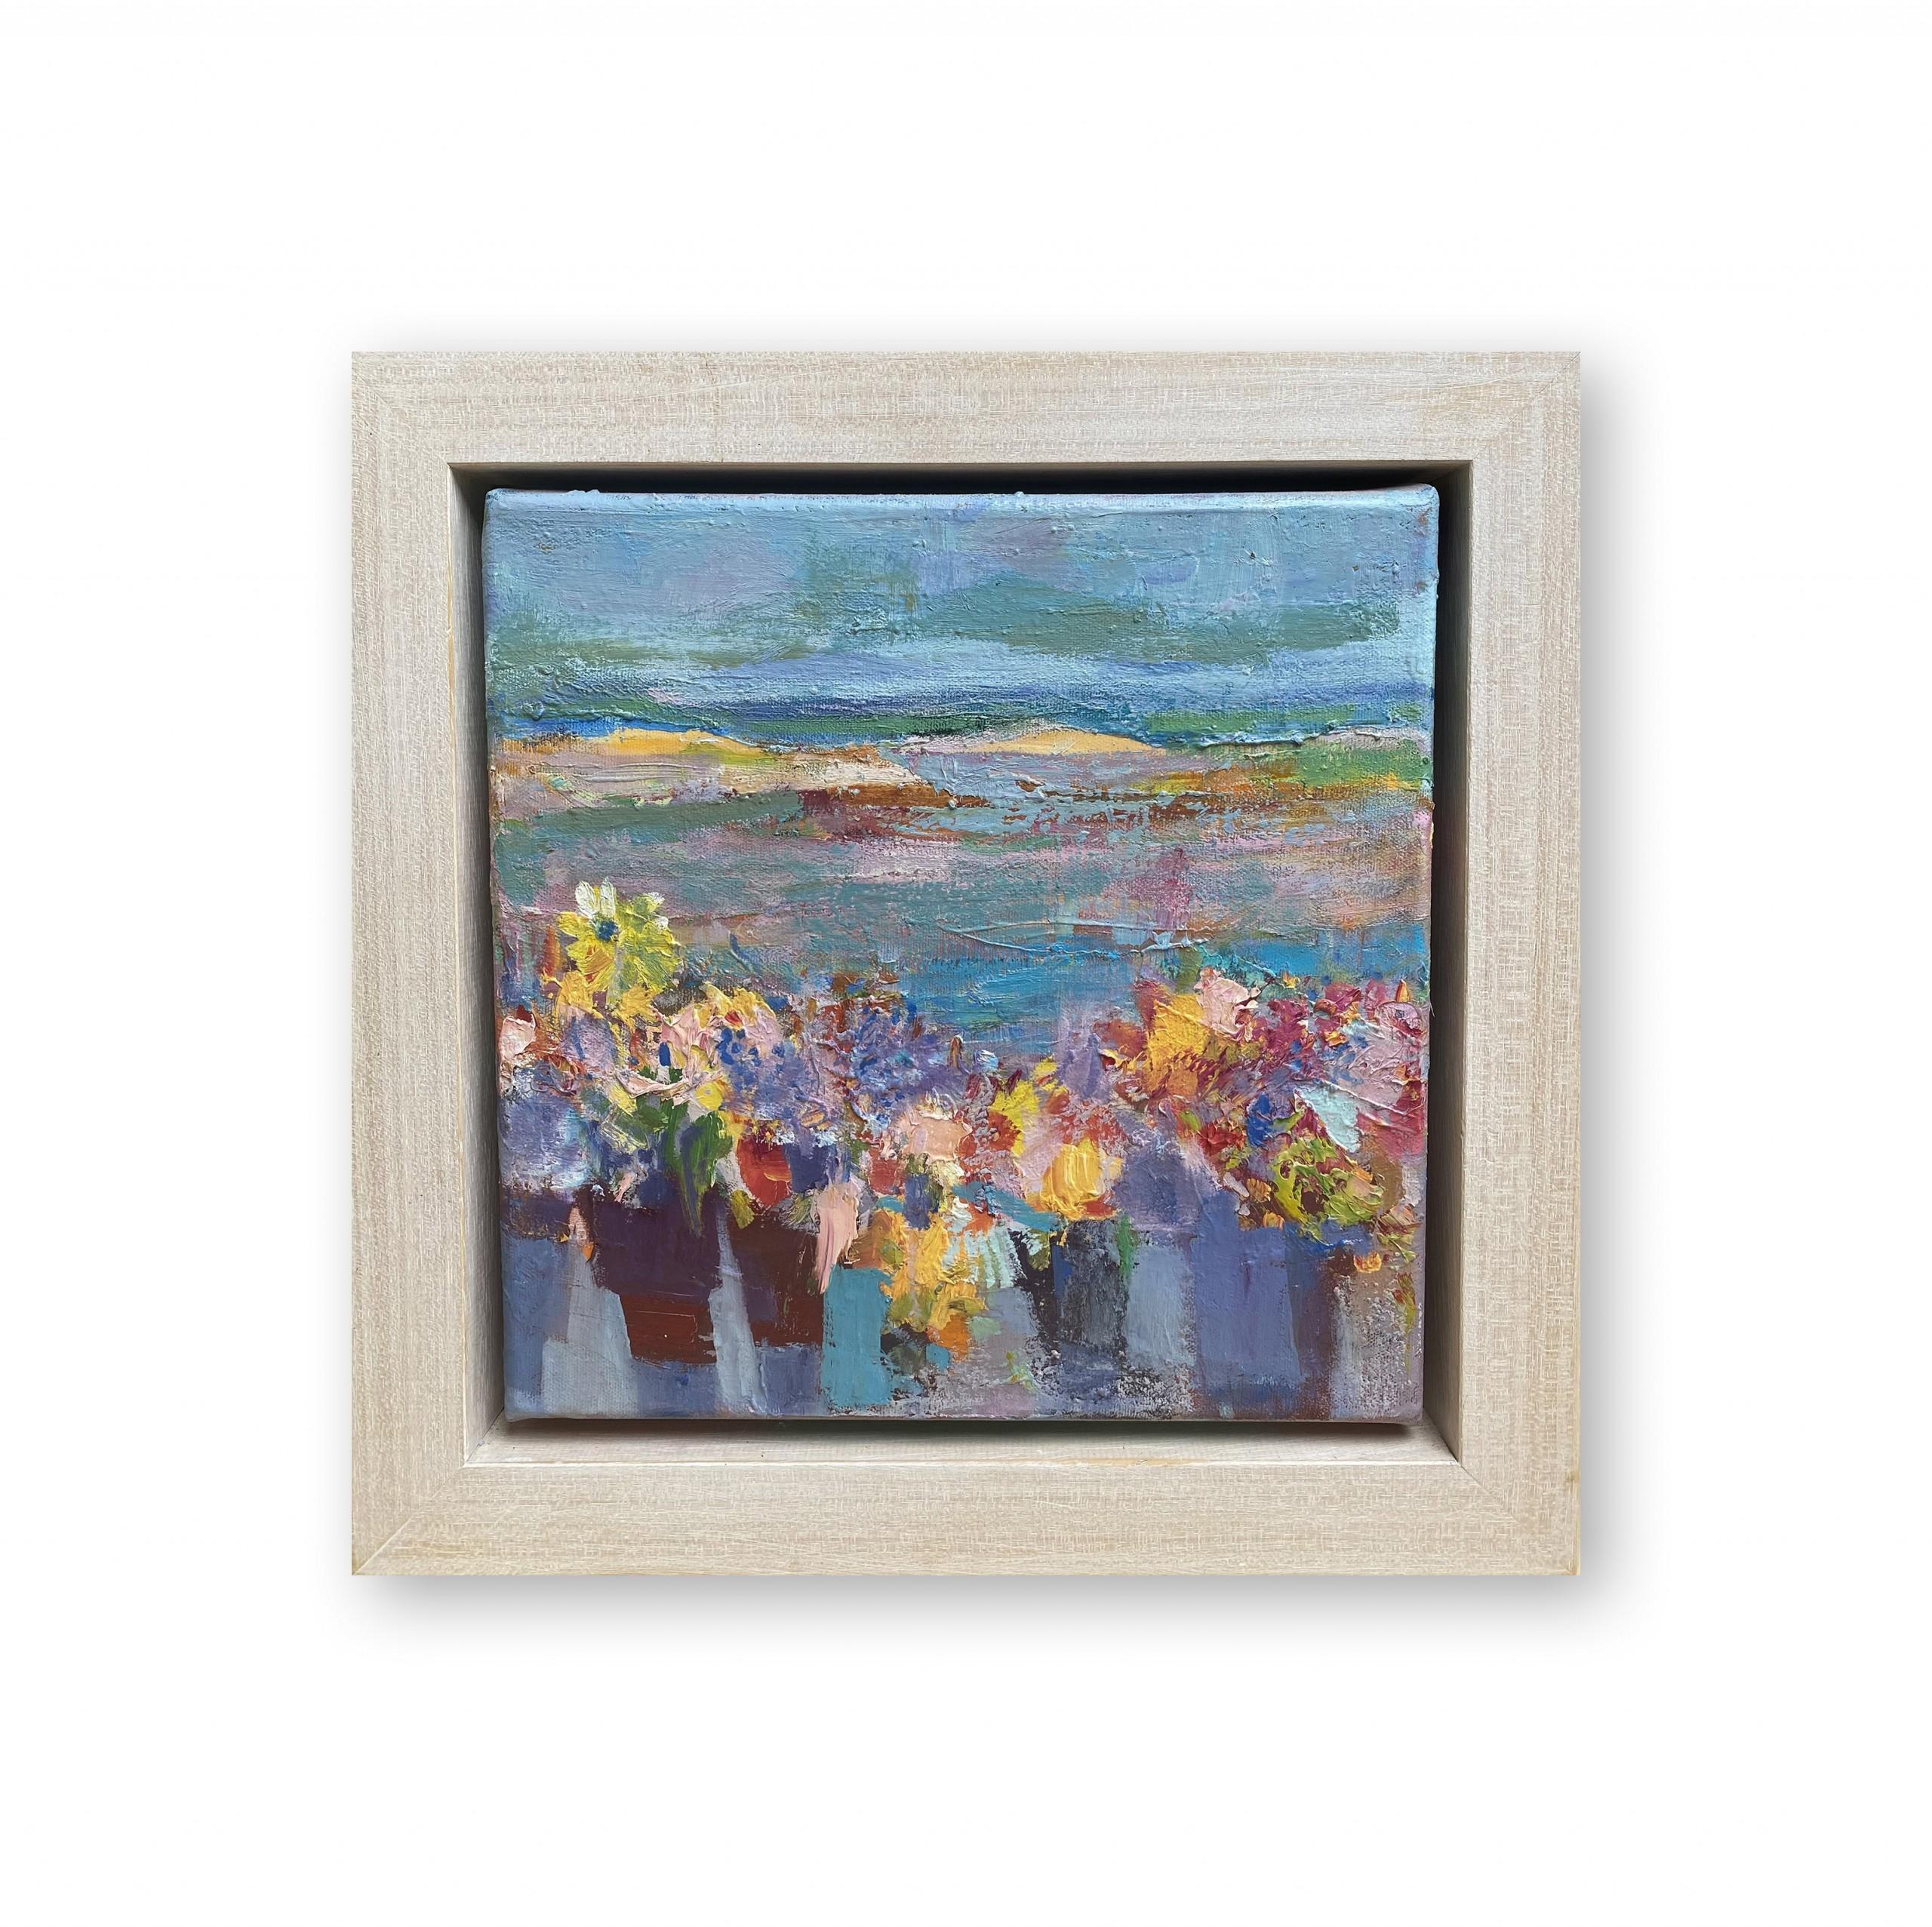 Pots of garden flowers displayed in a window setting. The view is of the Lynher estuary in Cornwall. Painted in impasto oils on canvas.

Discover new works by Teresa Pemberton available to buy online and in our art gallery. A professional artist